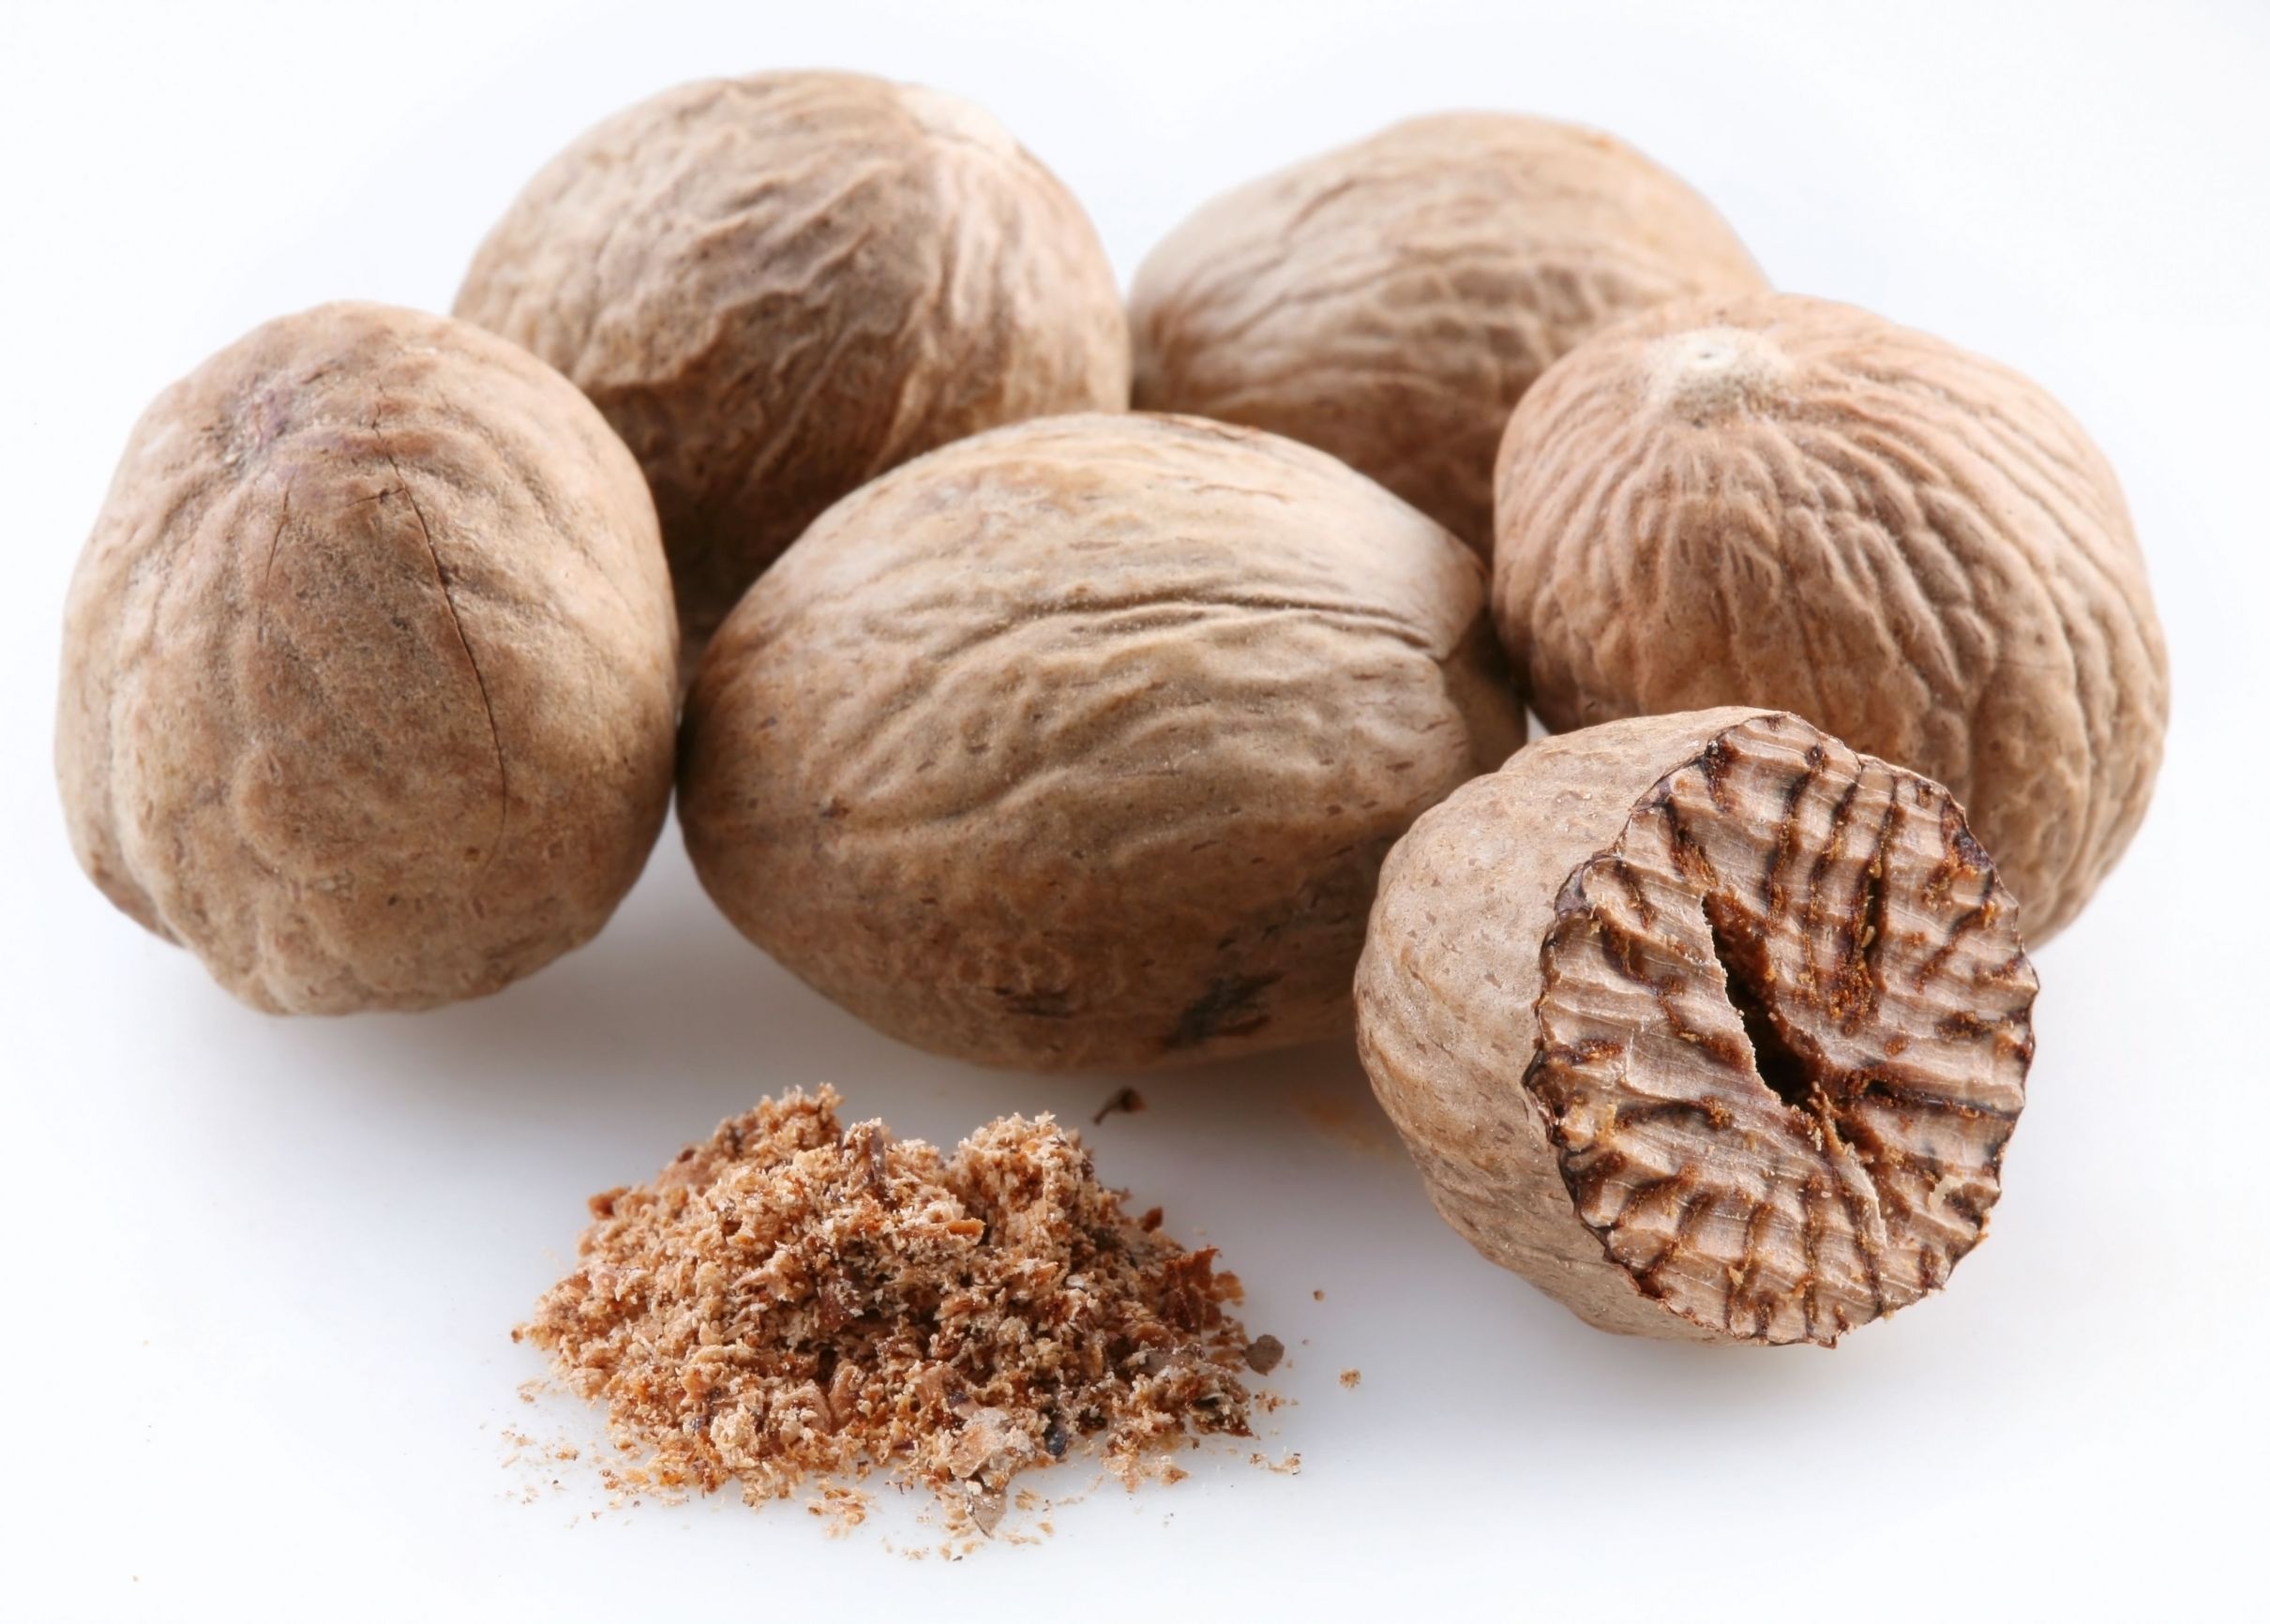 An Essential Guide To Nutmeg Oil - A Mystical & Exotic Spice